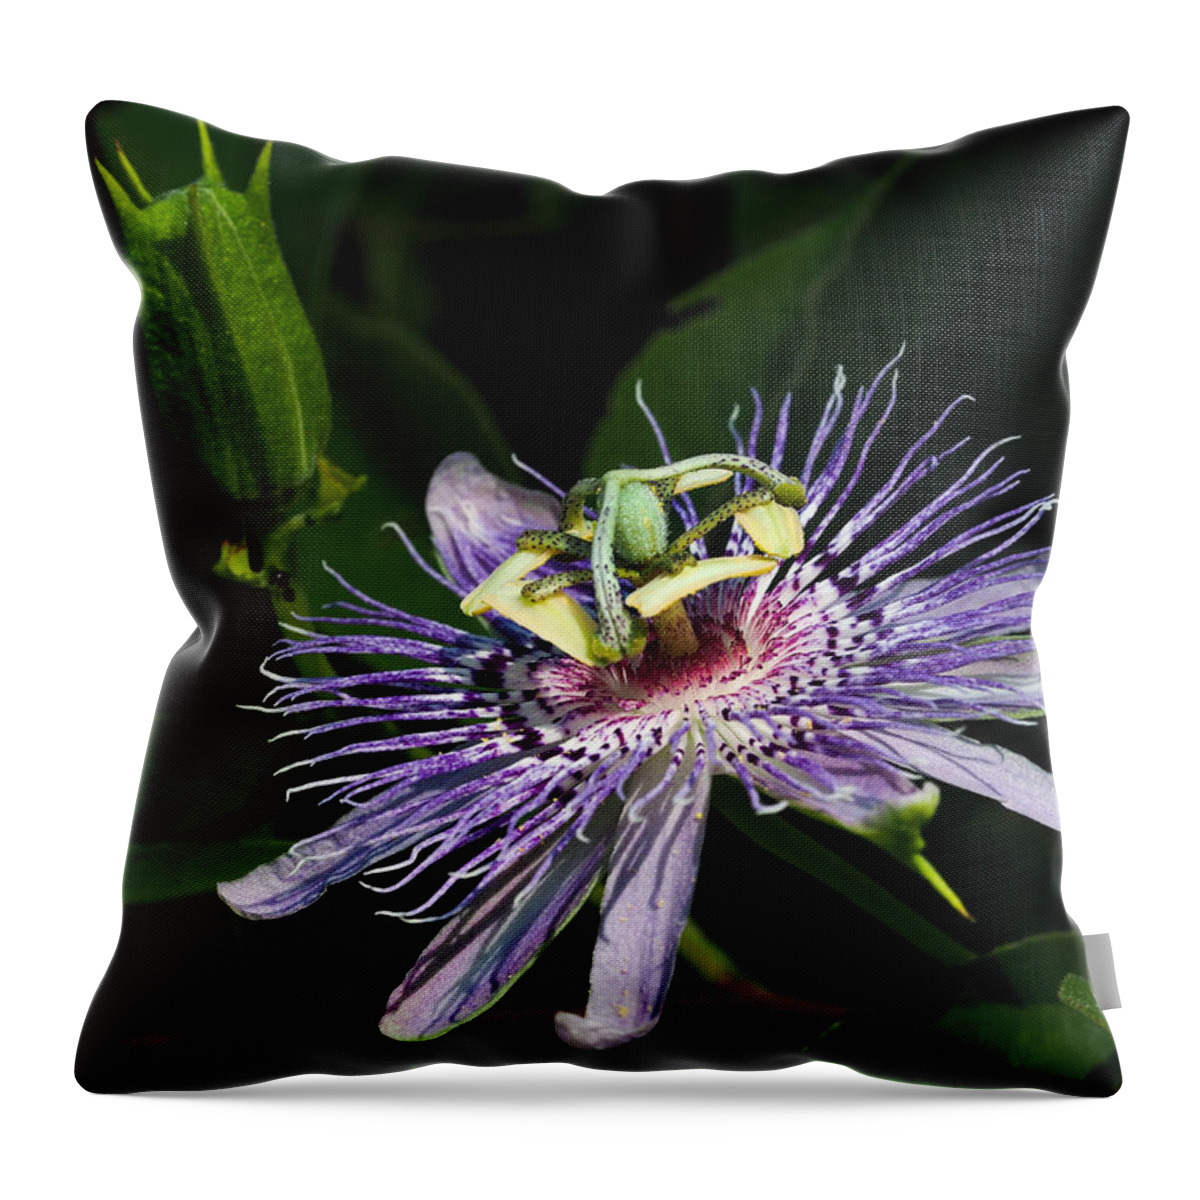 Passion Flower Throw Pillow featuring the photograph Passion Flower by Paula Ponath